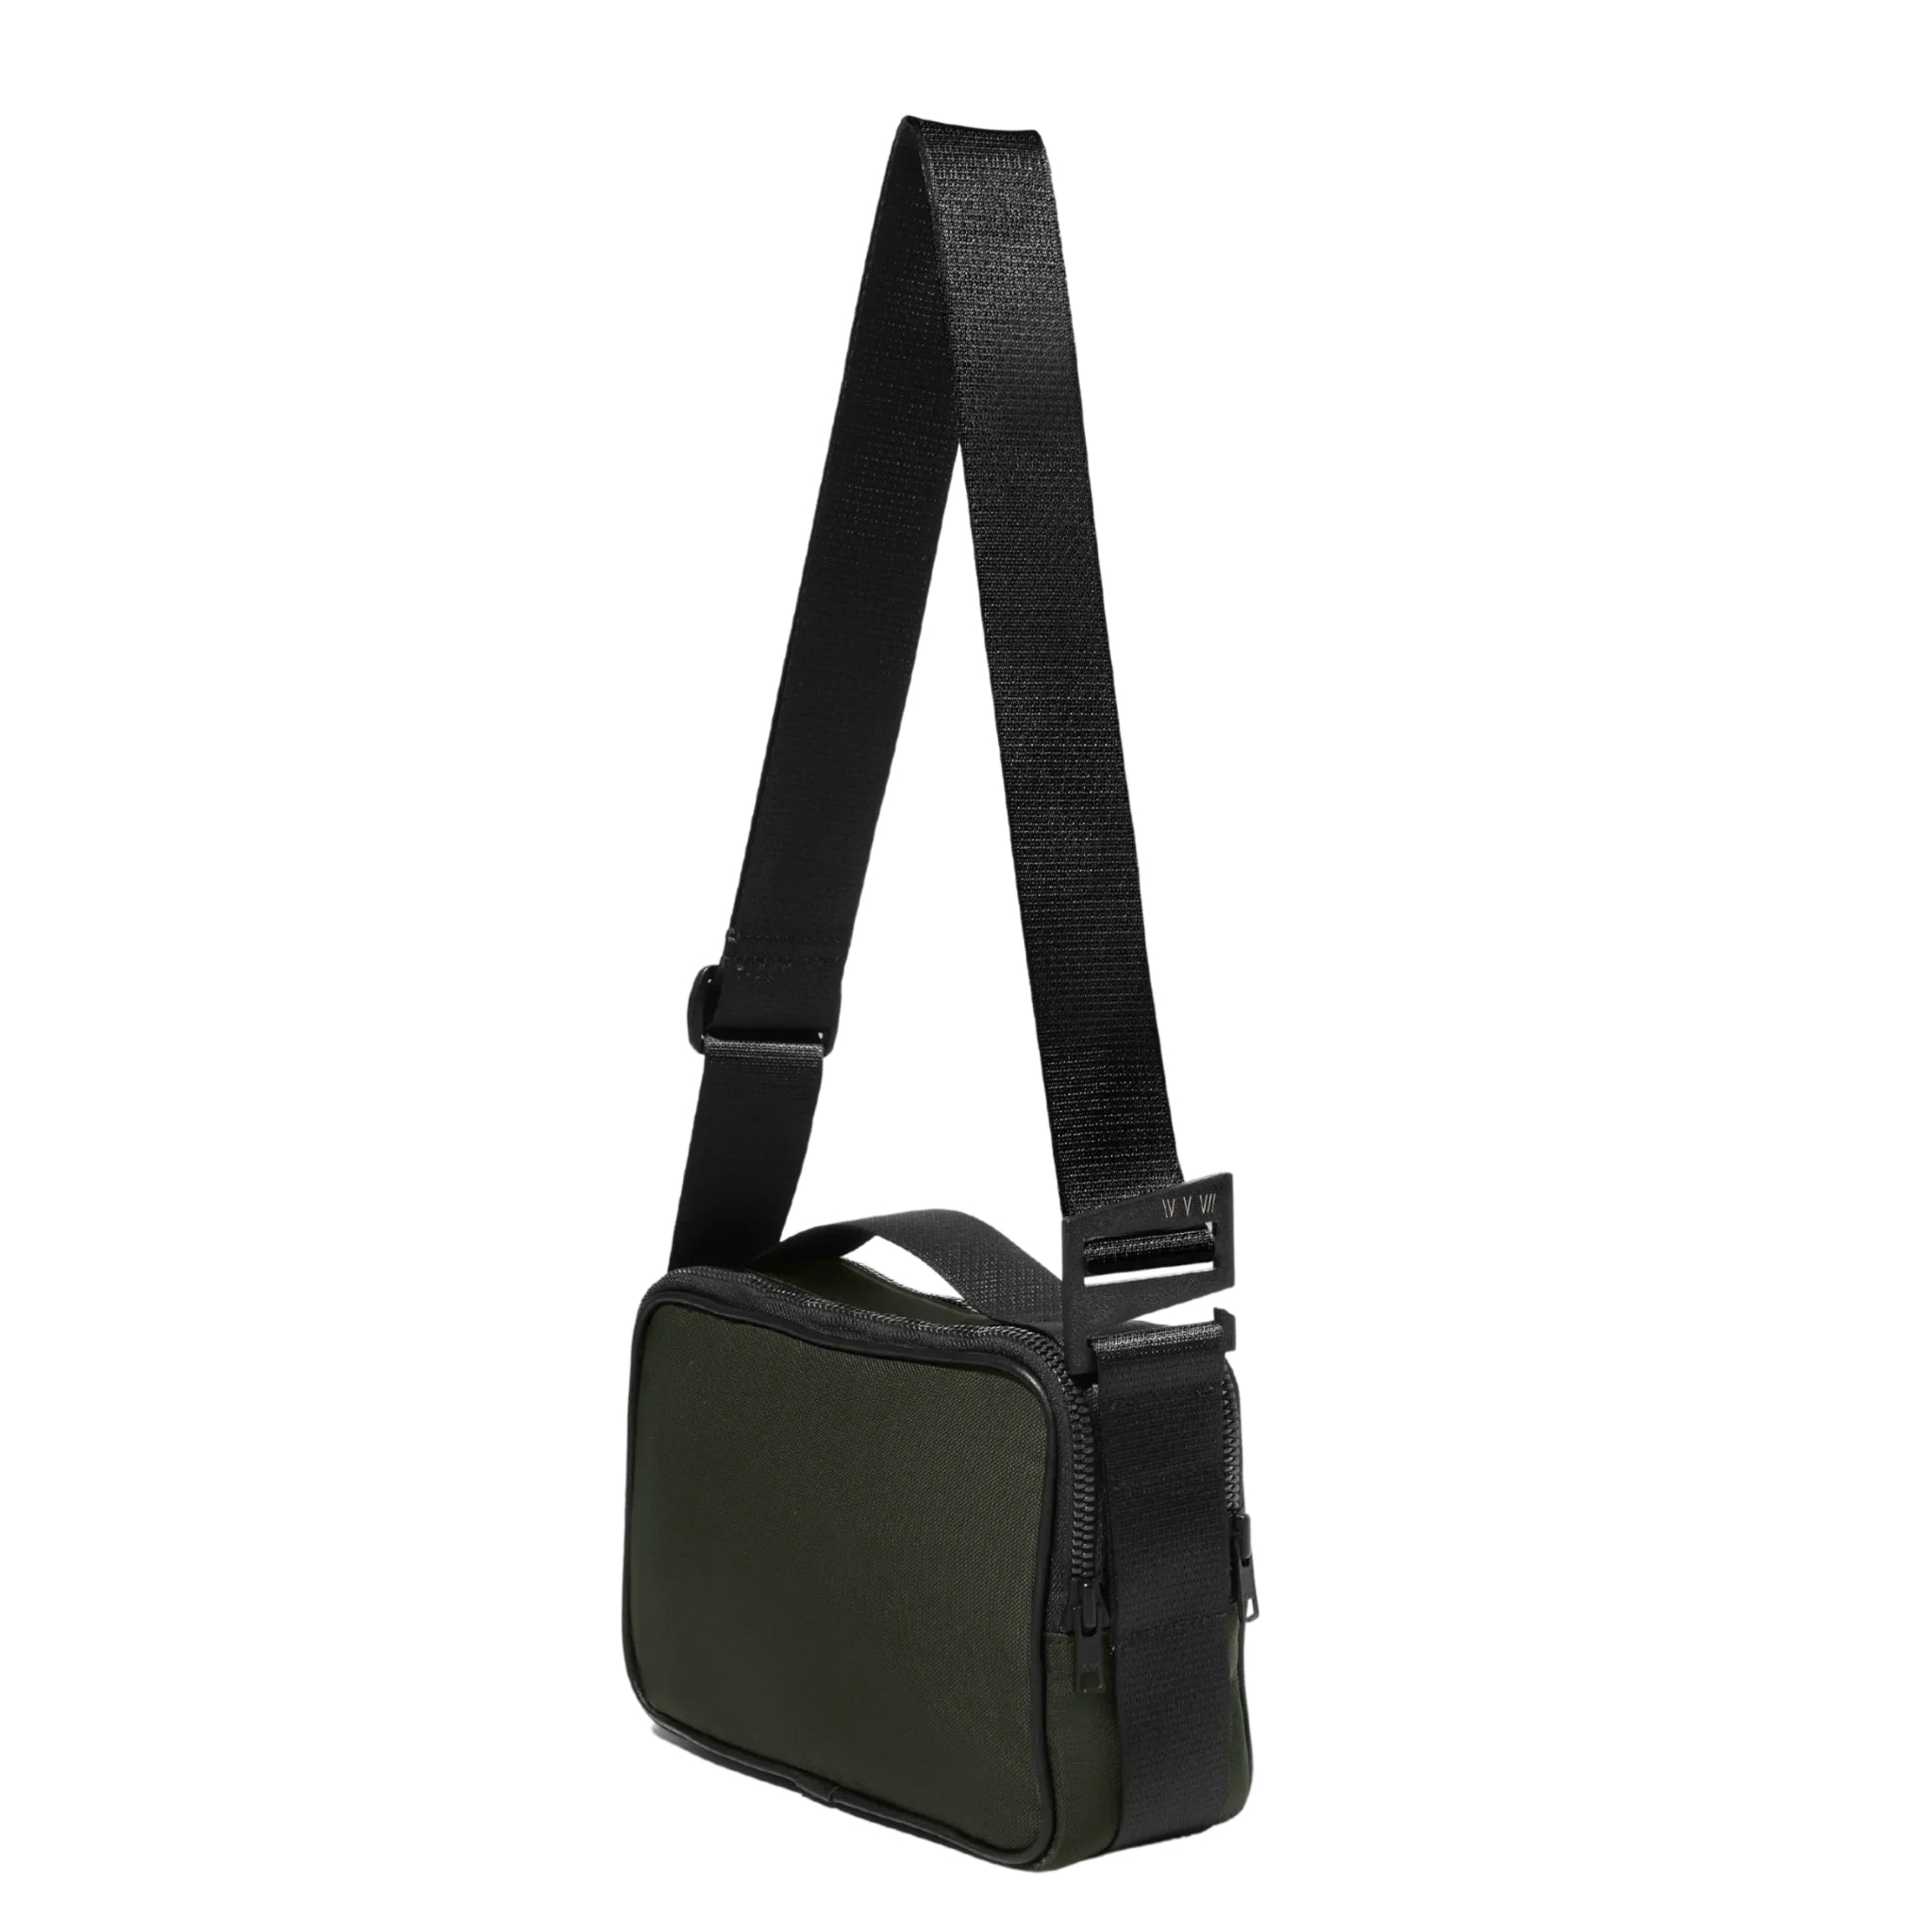 goodall bag in evergreen econyl side view on a white background